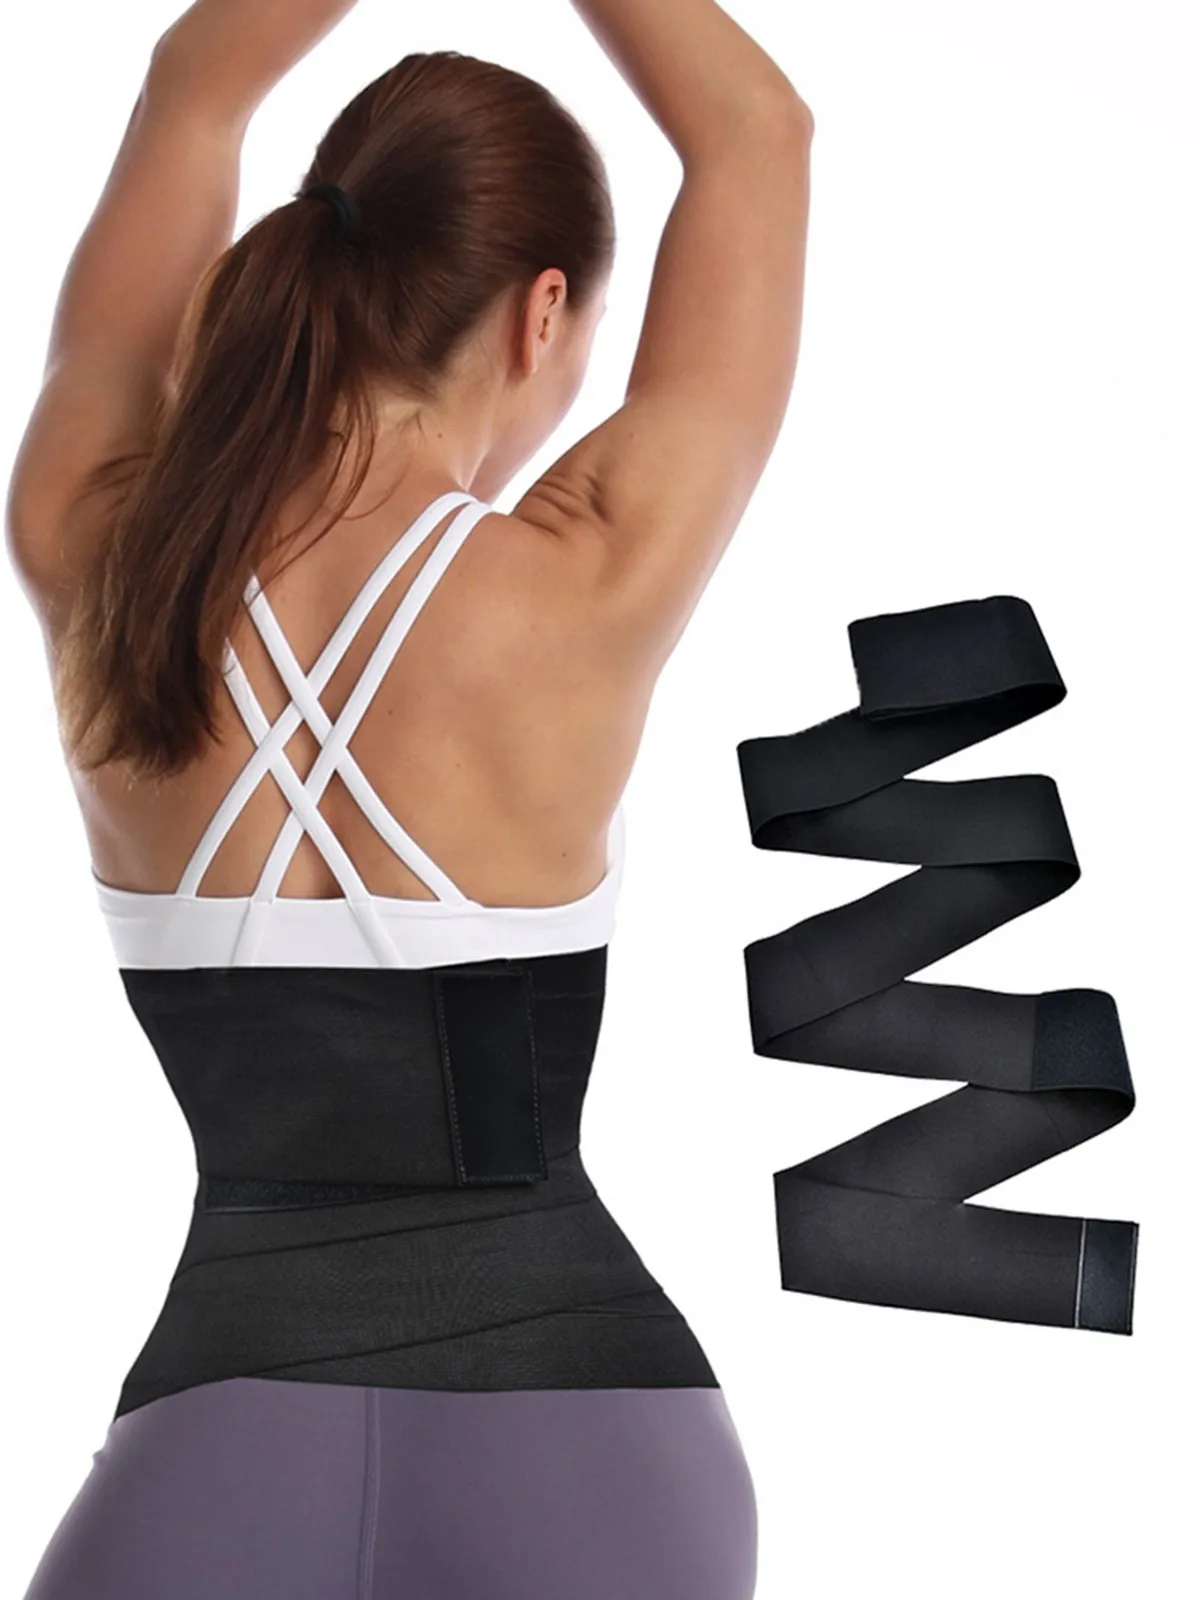 Snatch Me Up Bandage Wrap for Women Quick Bandage Wrap Lumbar Waist Support Trainer Back Braces Postpartum Recovery for Women Small 